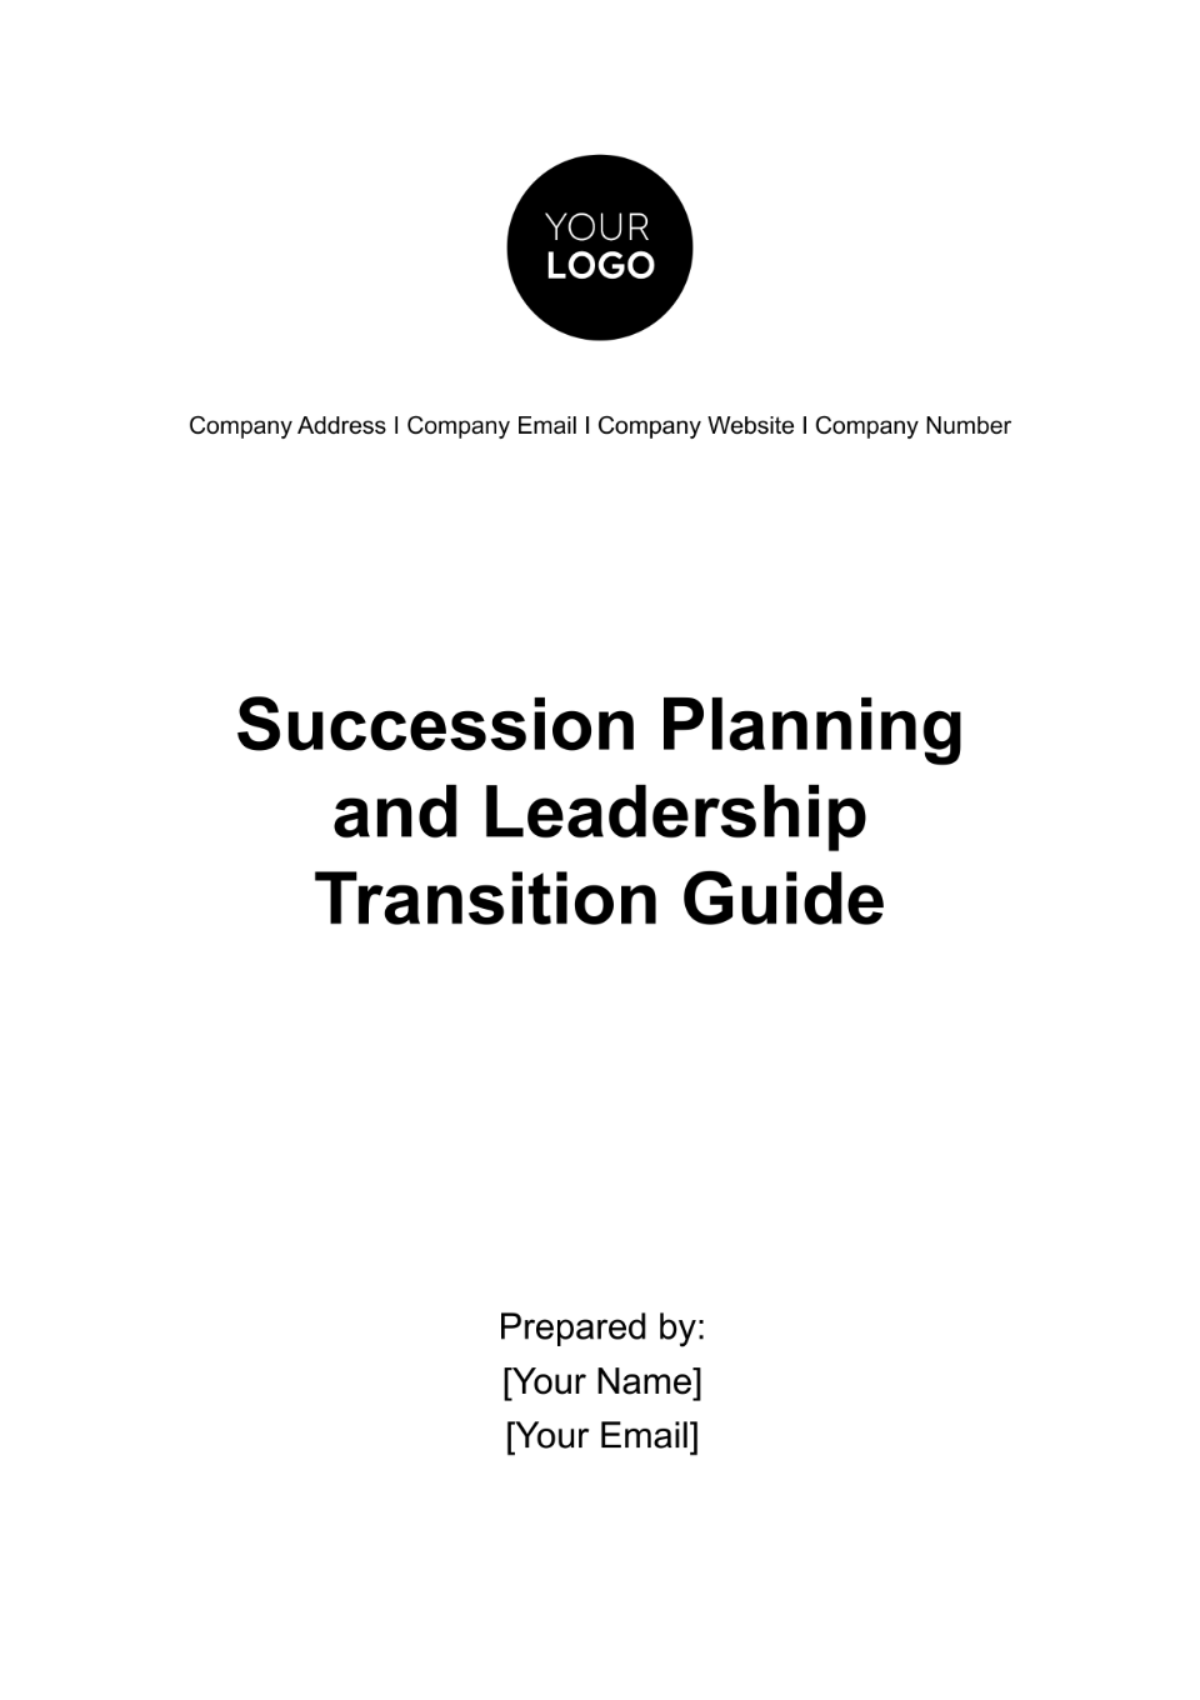 Free Succession Planning and Leadership Transition Guide HR Template